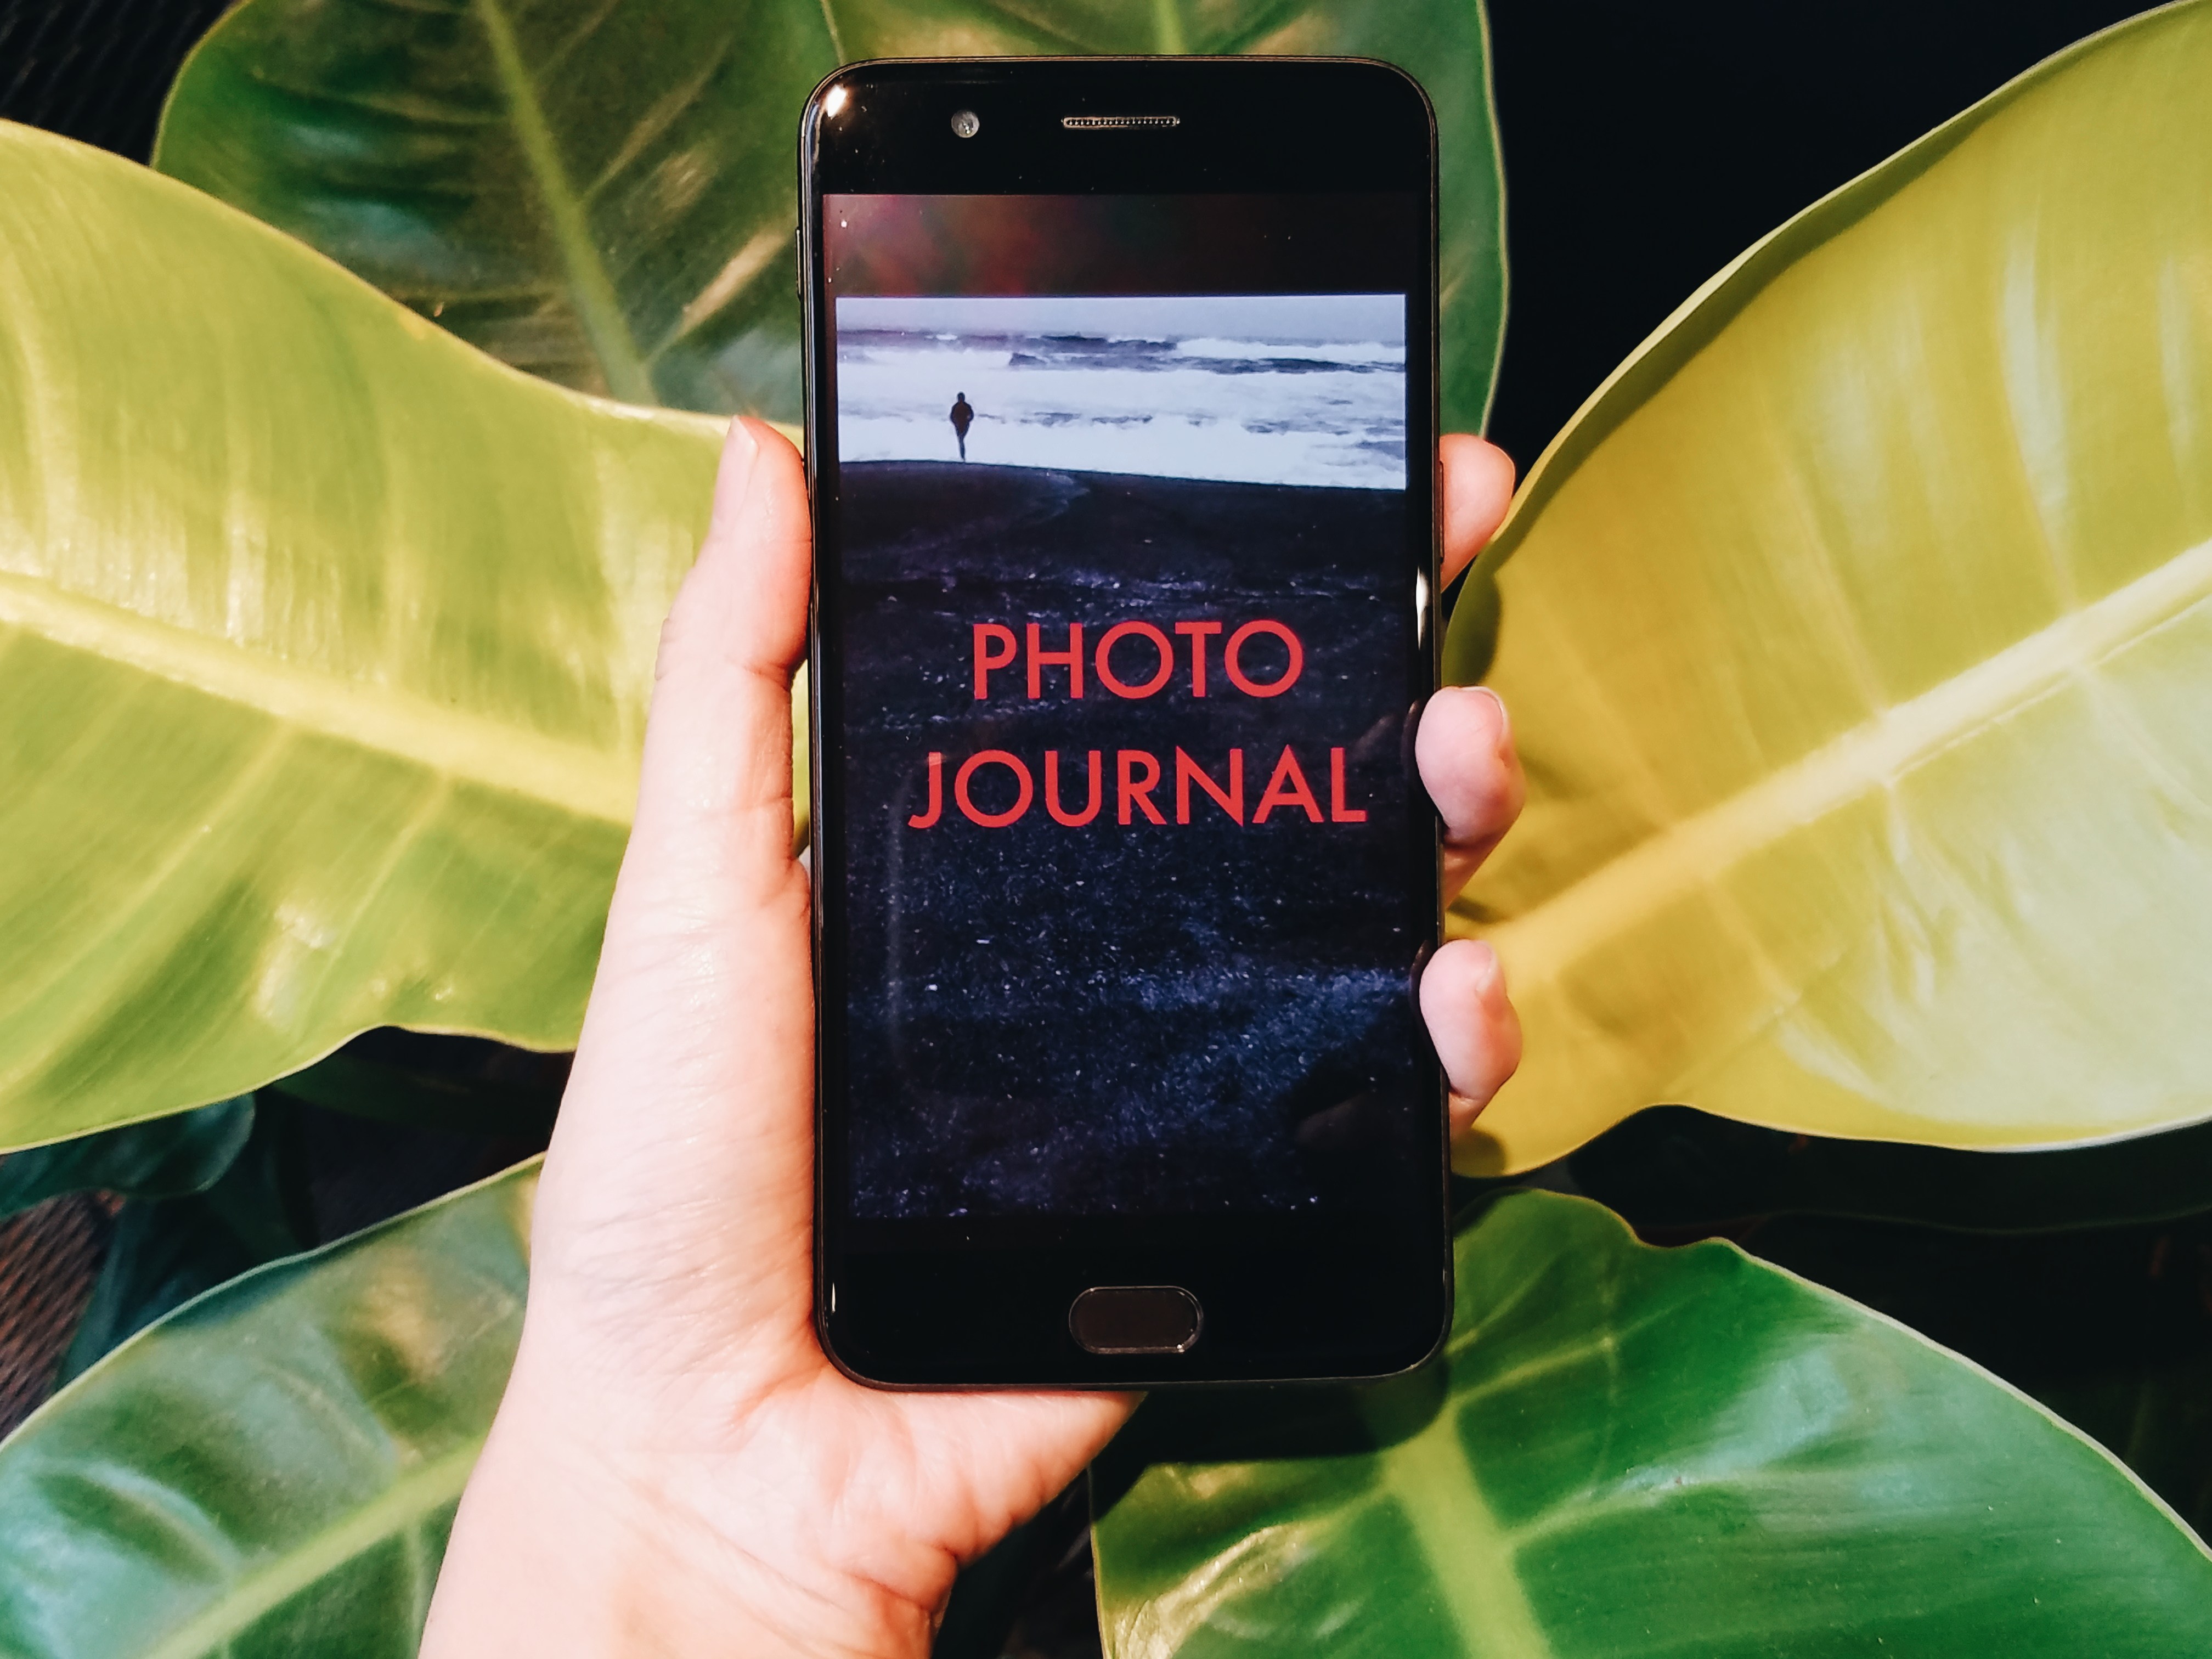 PHOTO JOURNAL: Mobile Edition (get it for FREE when you order PHOTO JOURNAL Print Edition)